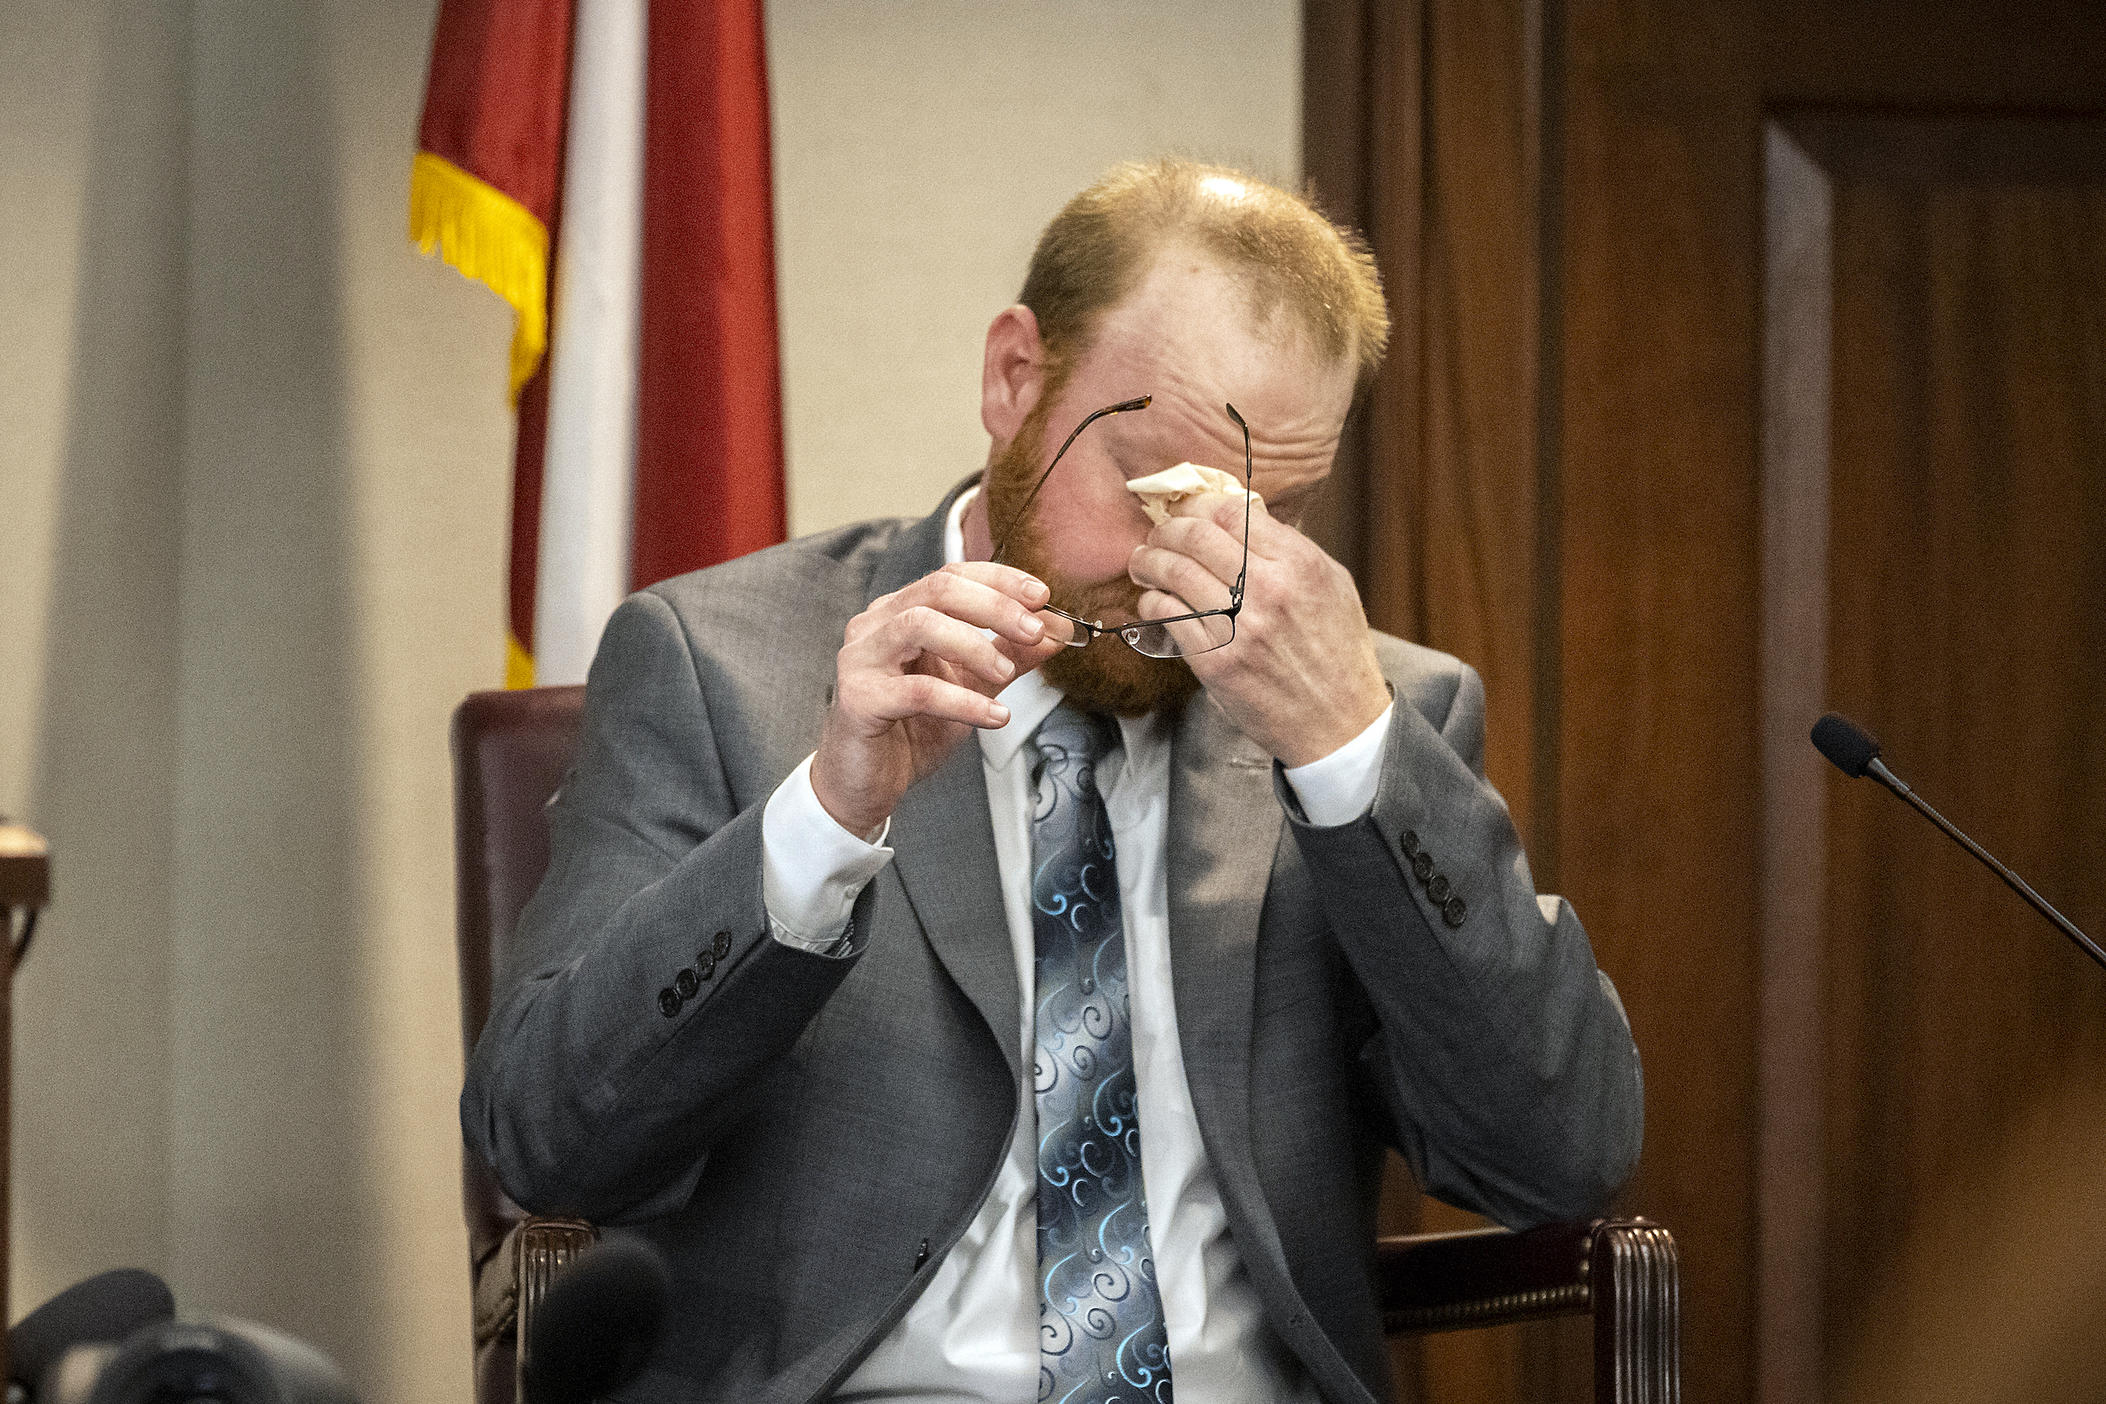 Travis McMichael reacts to question during his testimony in the trial of he and his father Greg McMichael and neighbor William "Roddie" Bryan in the Glynn County Courthouse, Wednesday, Nov. 17, 2021, in Brunswick, Ga.